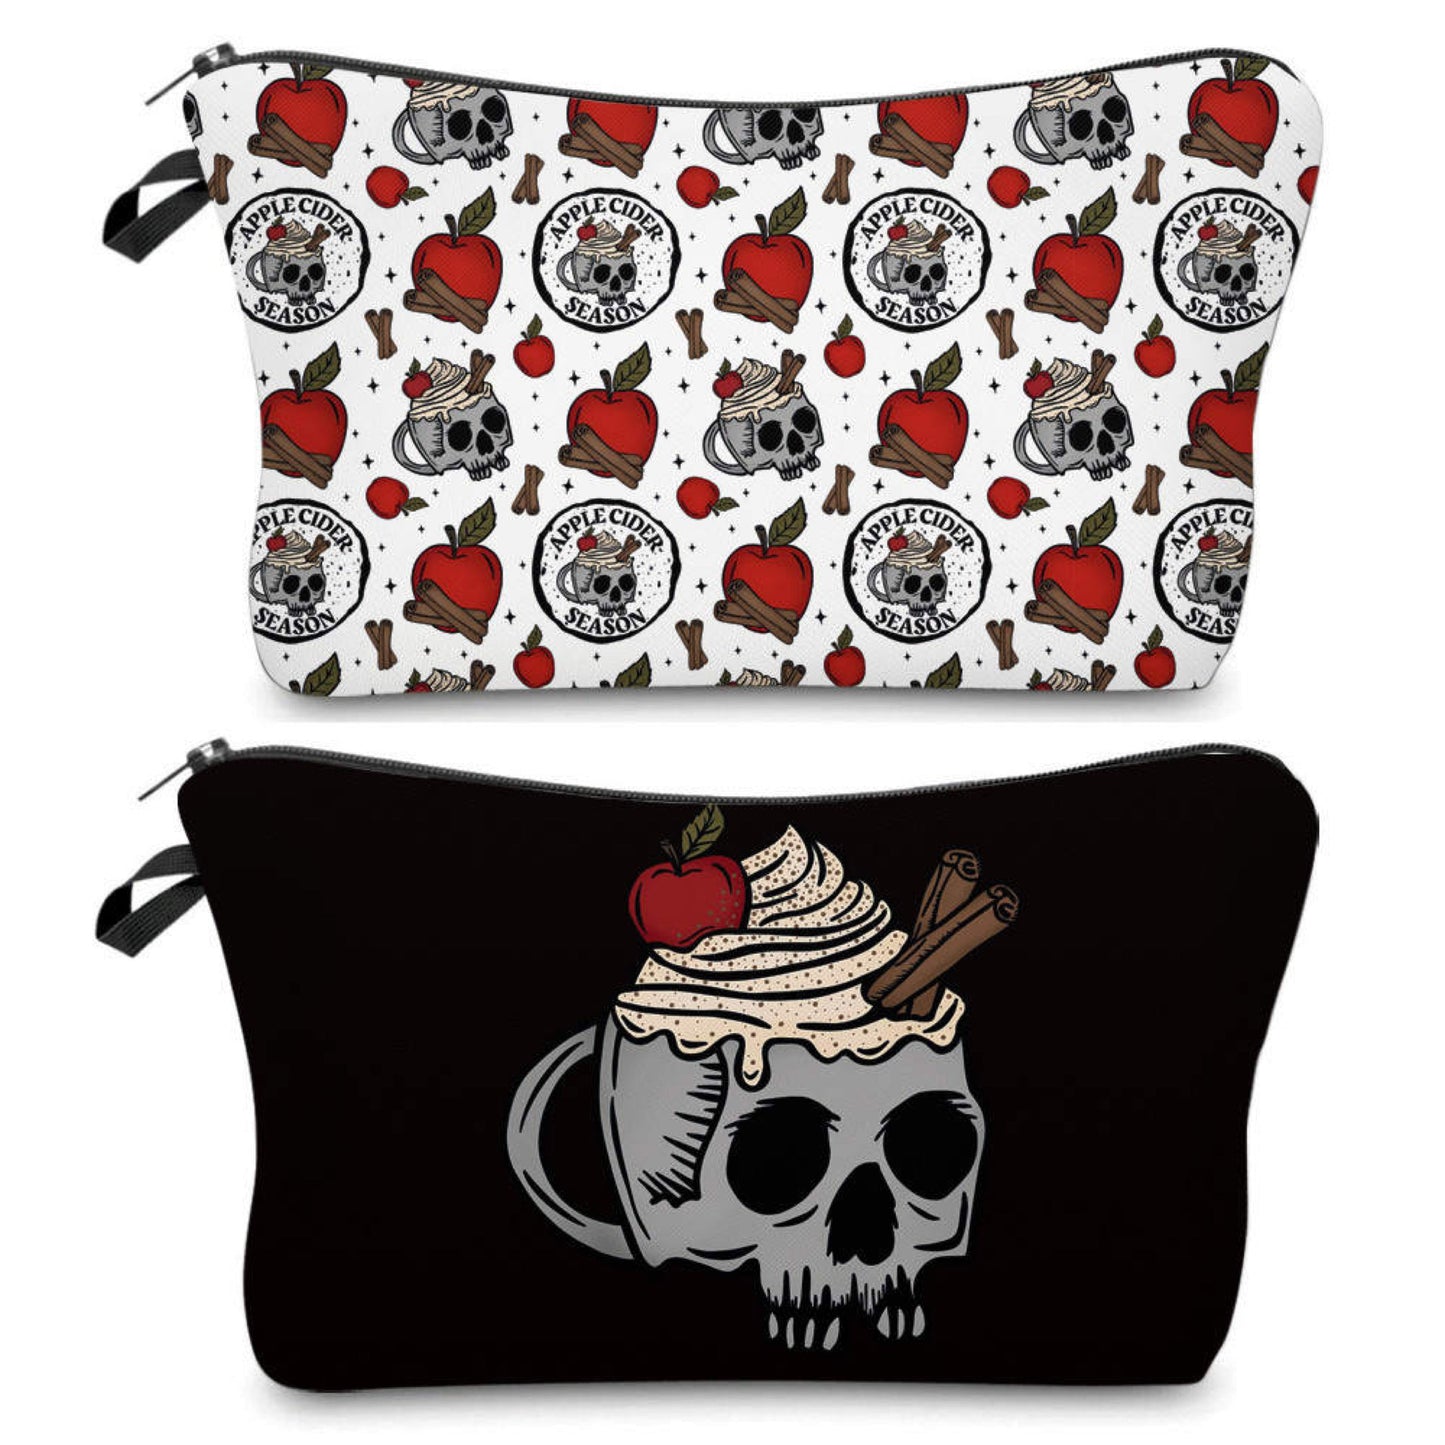 Apple Cider Season - Water-Resistant Multi-Use Pouch